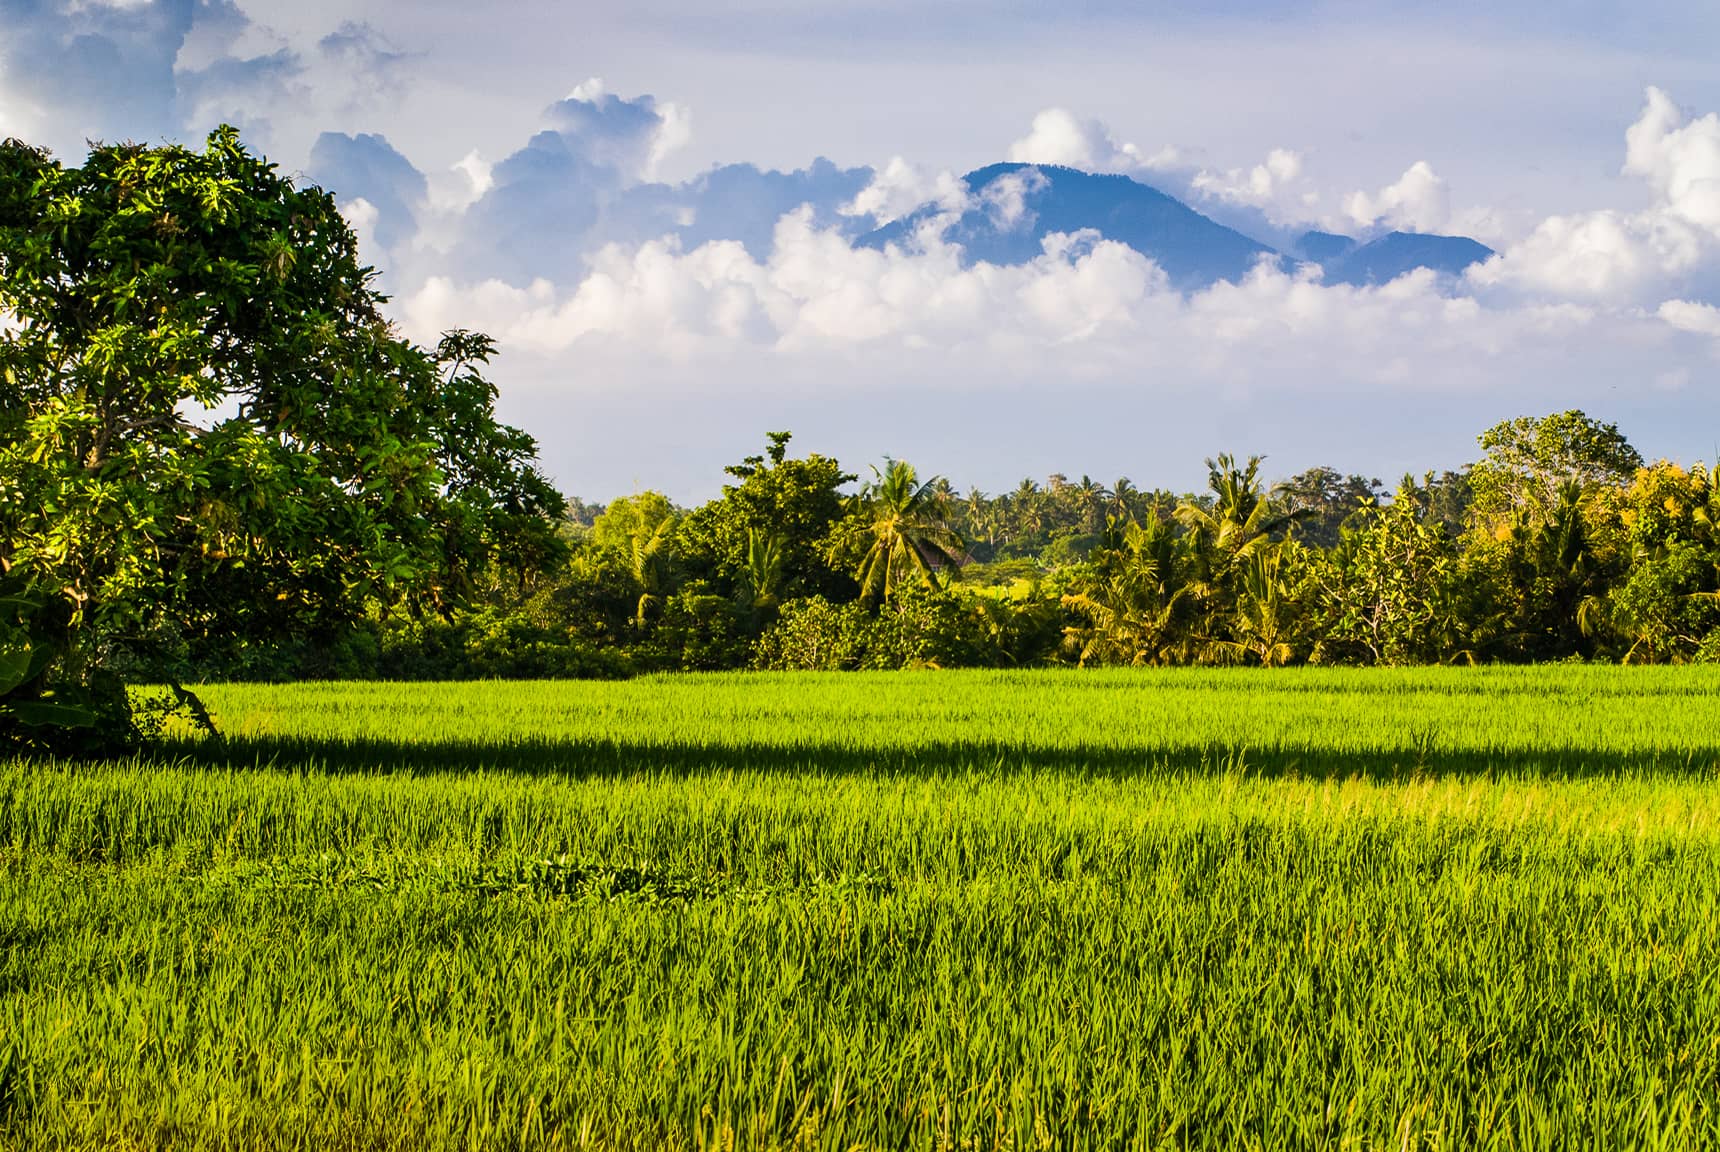 Professional photos of rice planting, harvesting, and processing in Bali Indonesia